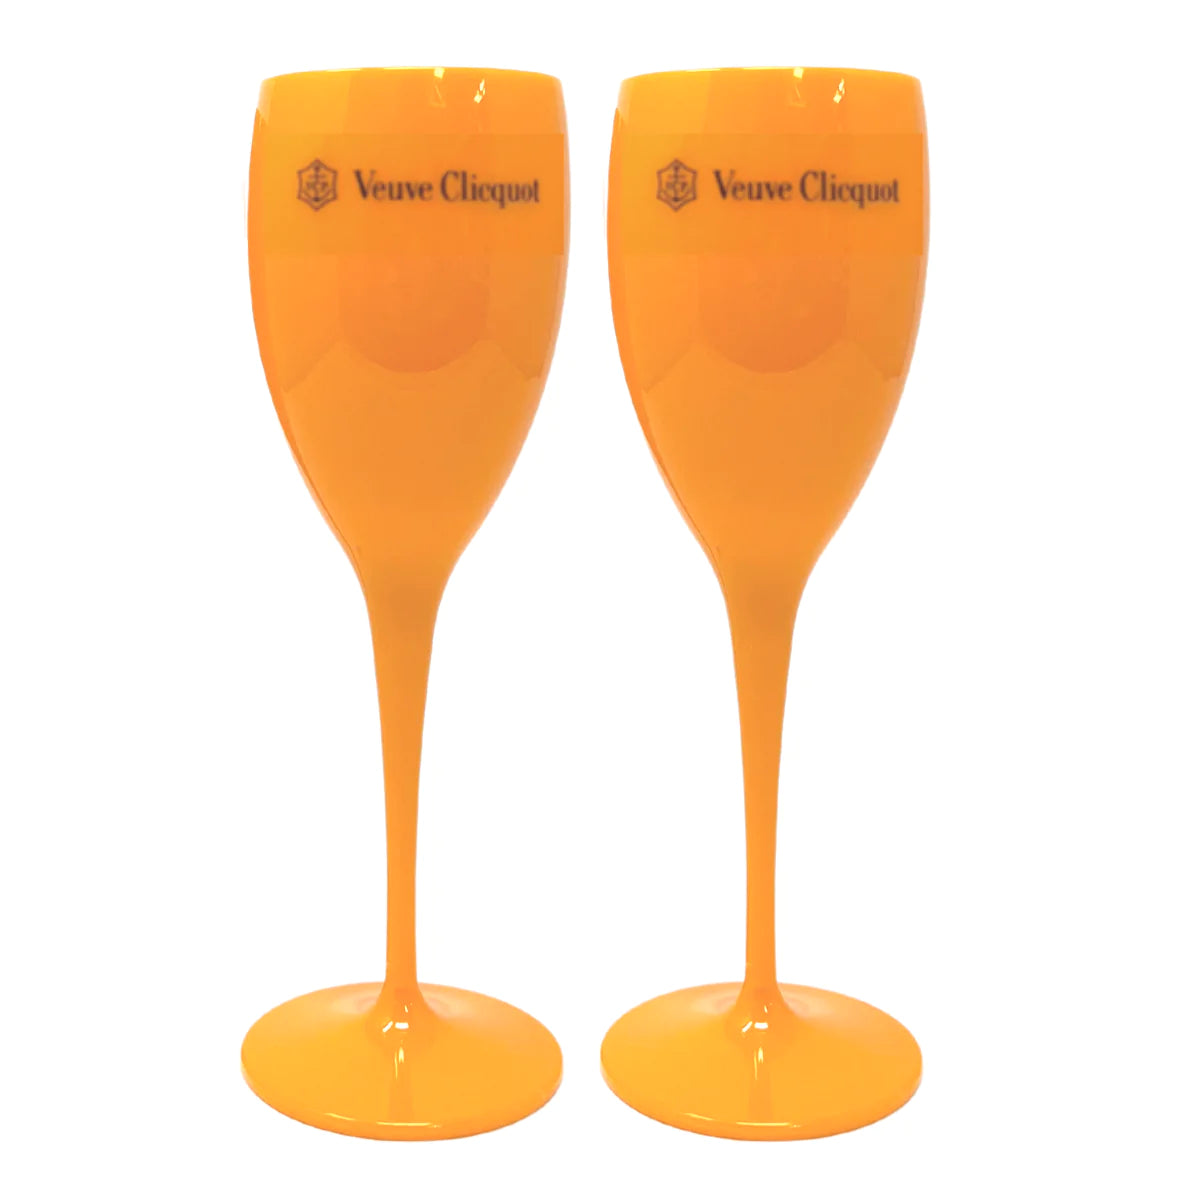 Orange colored plastic champagne glass from Tart by Taylor 